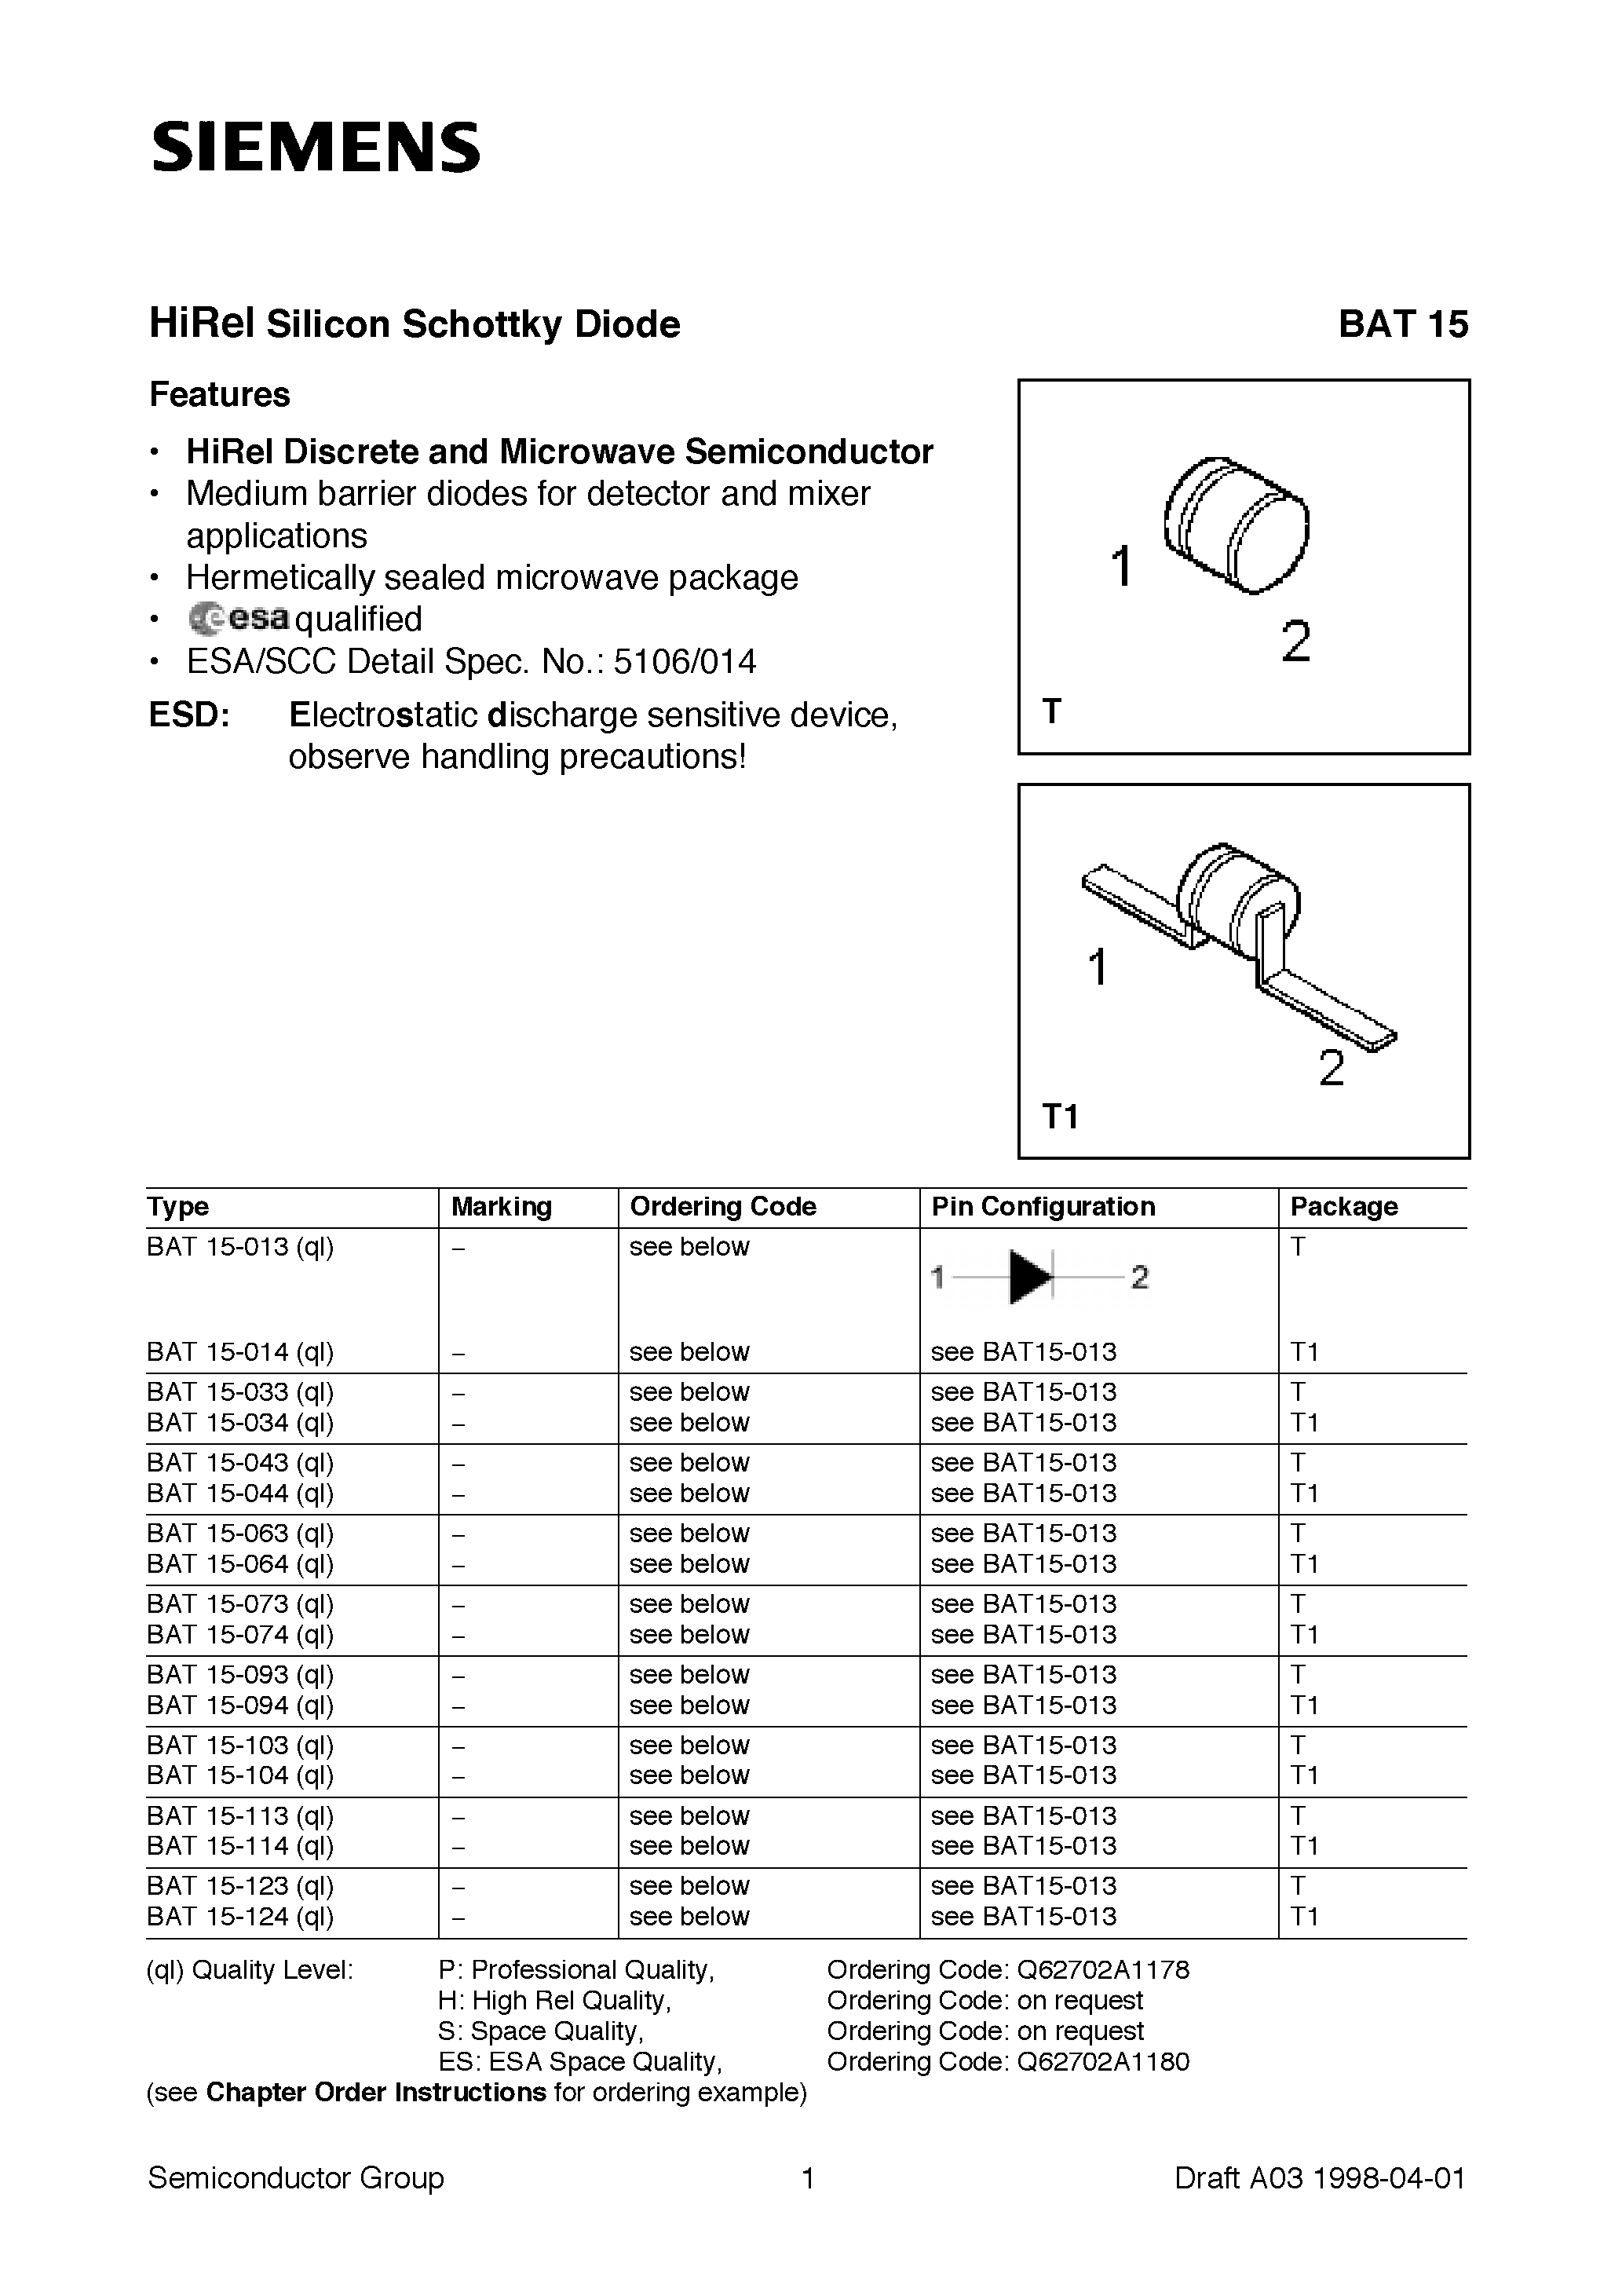 Datasheet BAT15-064 - HiRel Silicon Schottky Diode (HiRel Discrete and Microwave Semiconductor Medium barrier diodes for detector and mixer applications) page 1